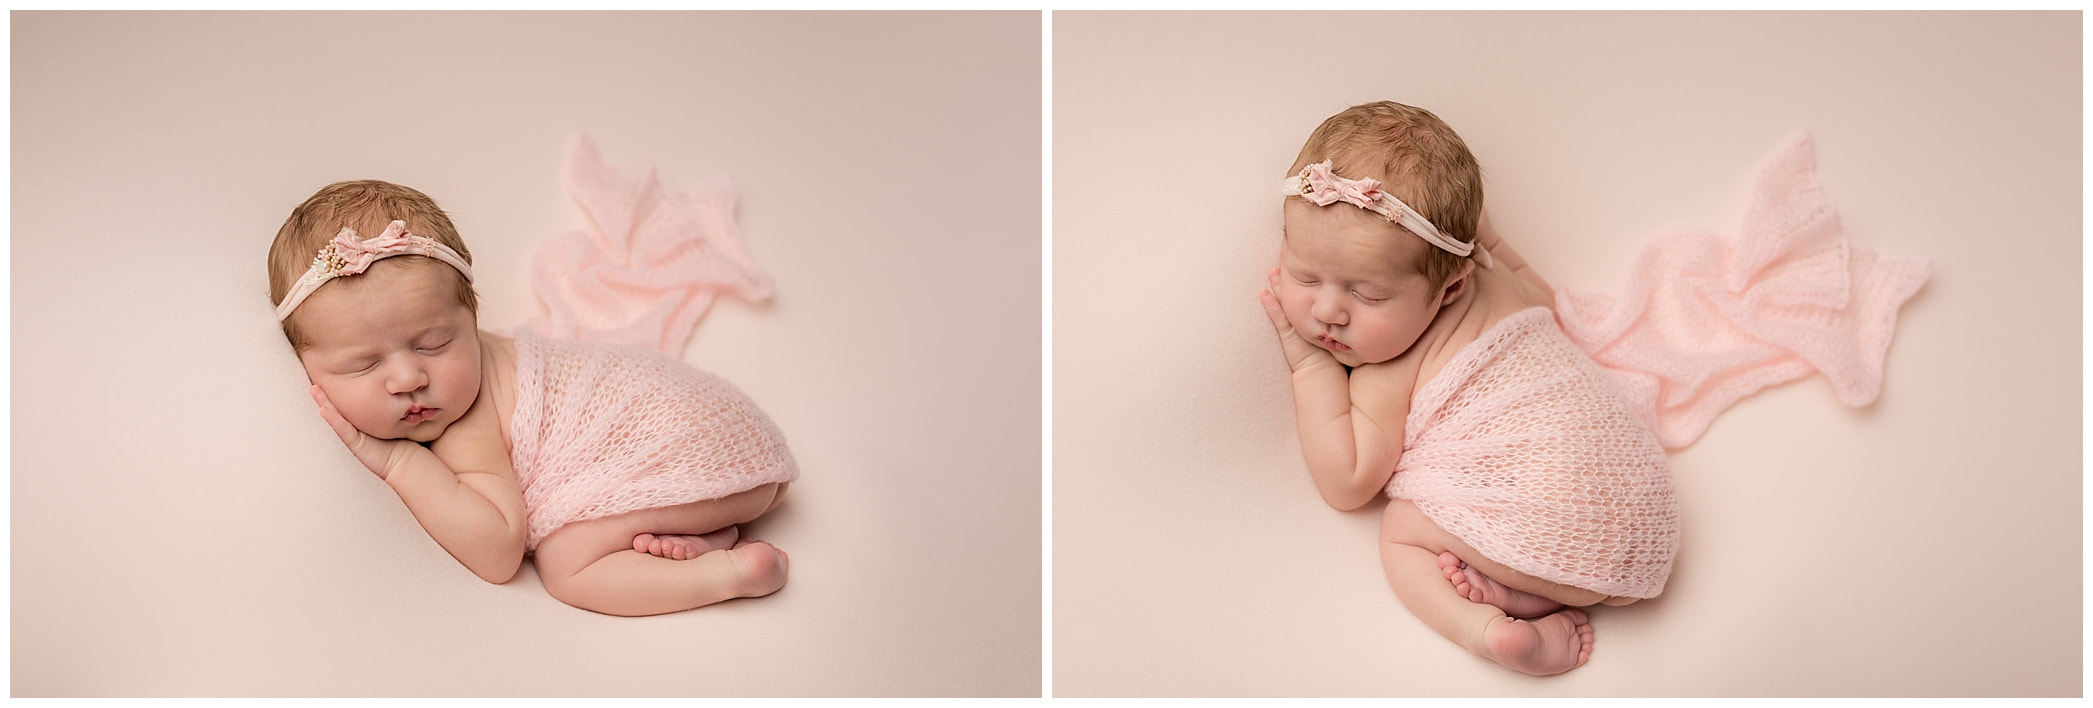 Tushie pose by Lynne Harper baby photographer